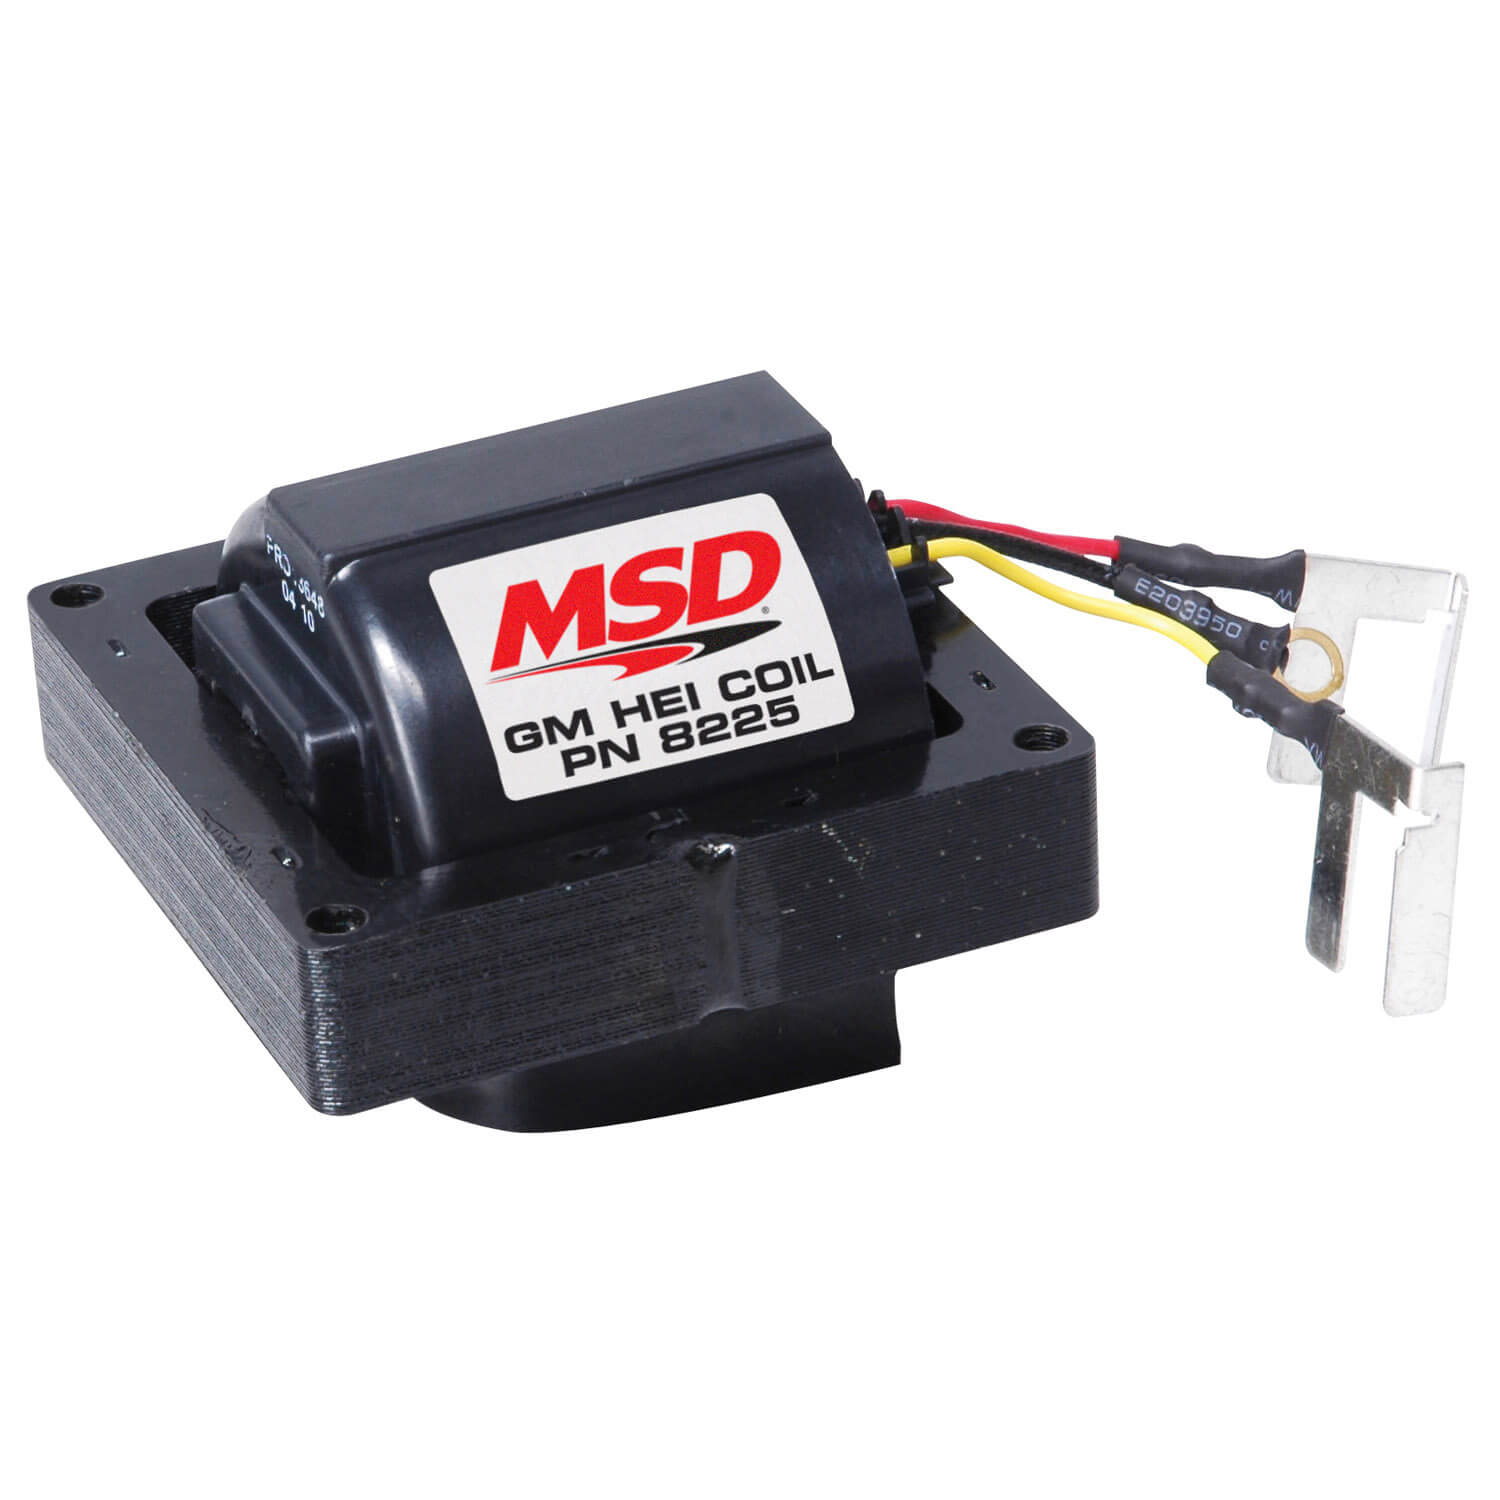 MSD IGNITION HEI COIL, FOR GM HEI DISTRIBUTORS